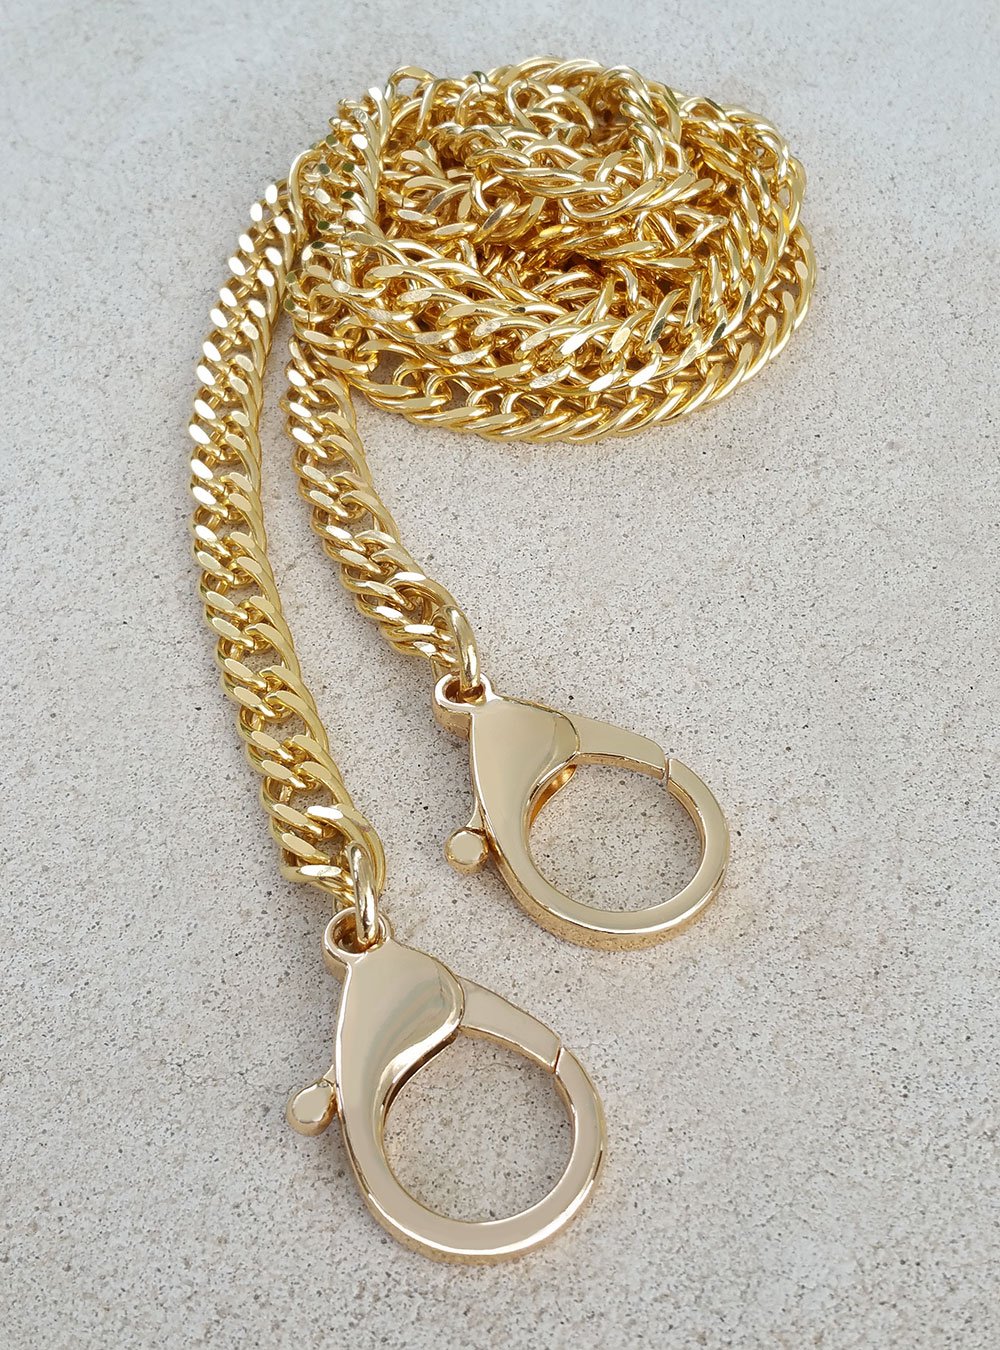 GOLD Chain Purse Strap - Diamond Cut Double Curb - 3/8 Wide - Choice of  Length & Clasp